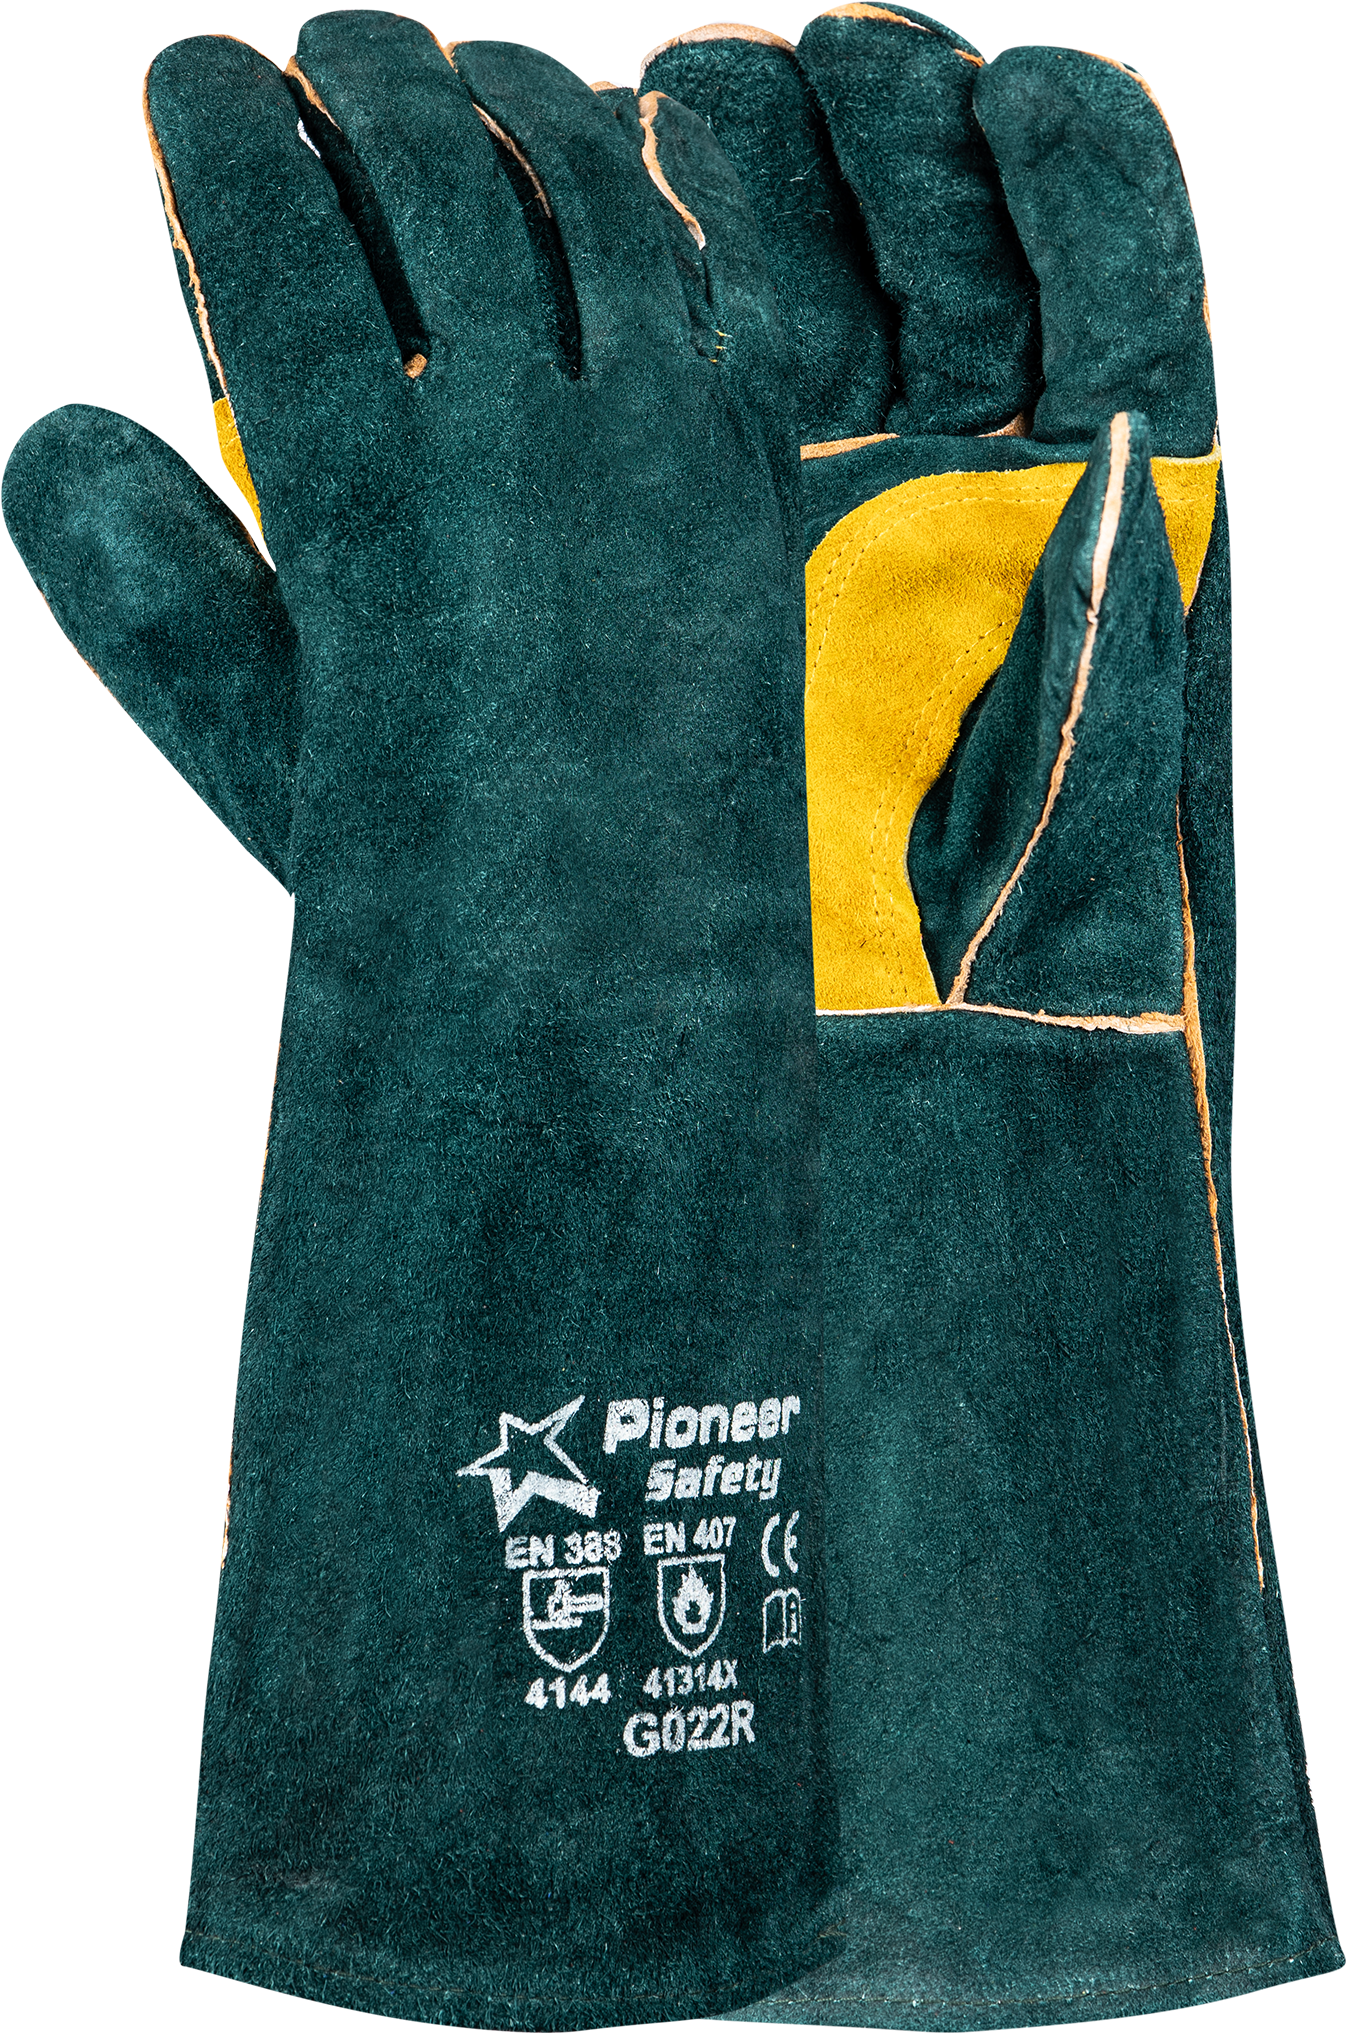 PIONEER Leather Green Reinforced Palm - Gauntlet